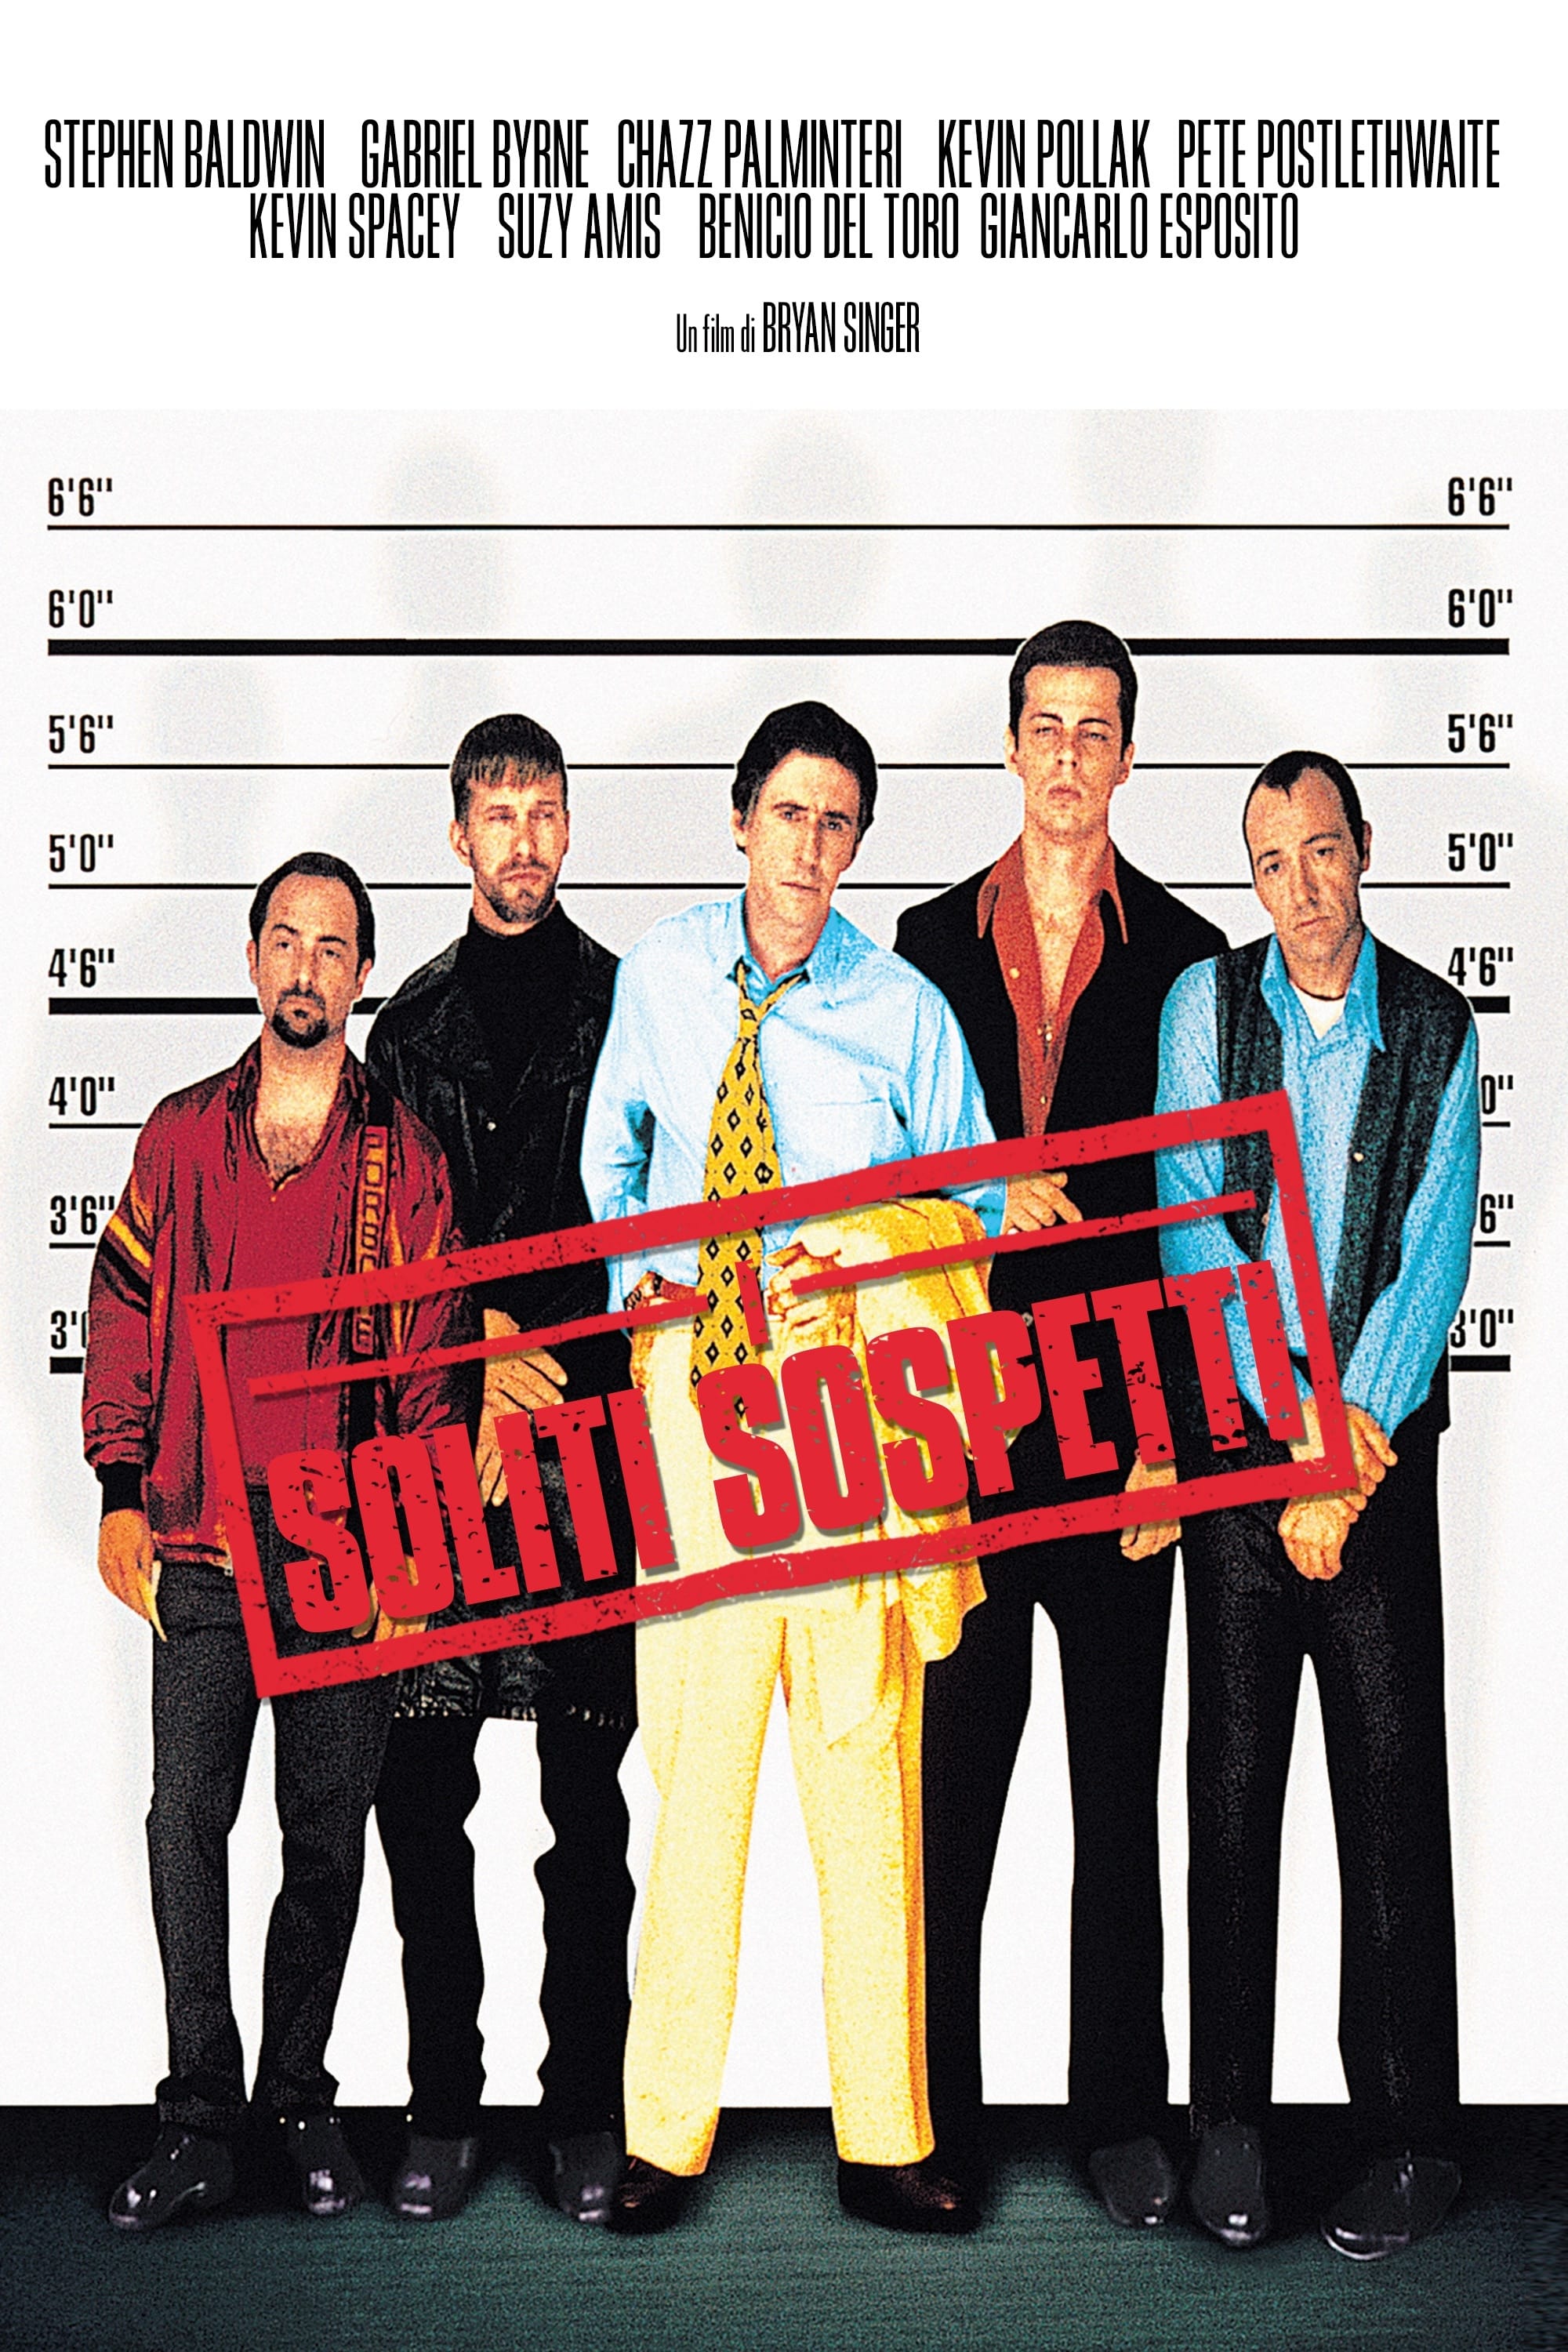 Poster and image movie The Usual Suspects